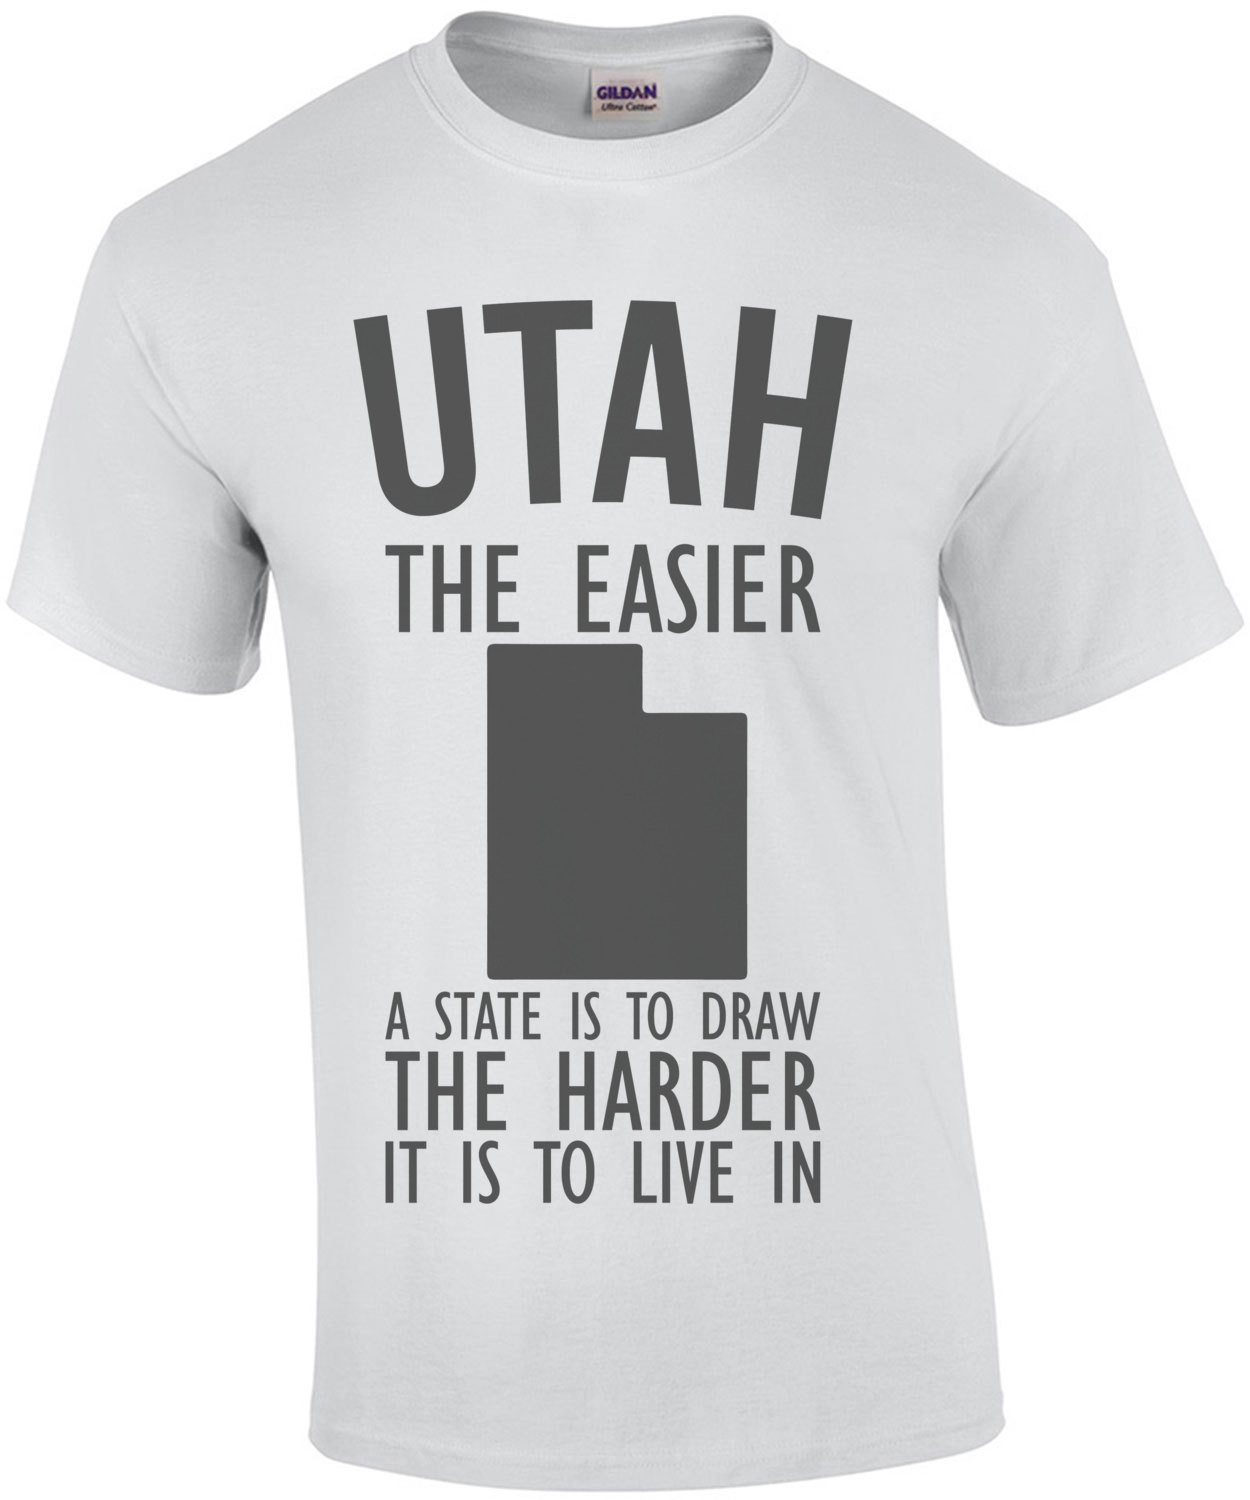 Utah the easier a state is to draw the harder it is to live in - Utah T-Shirt